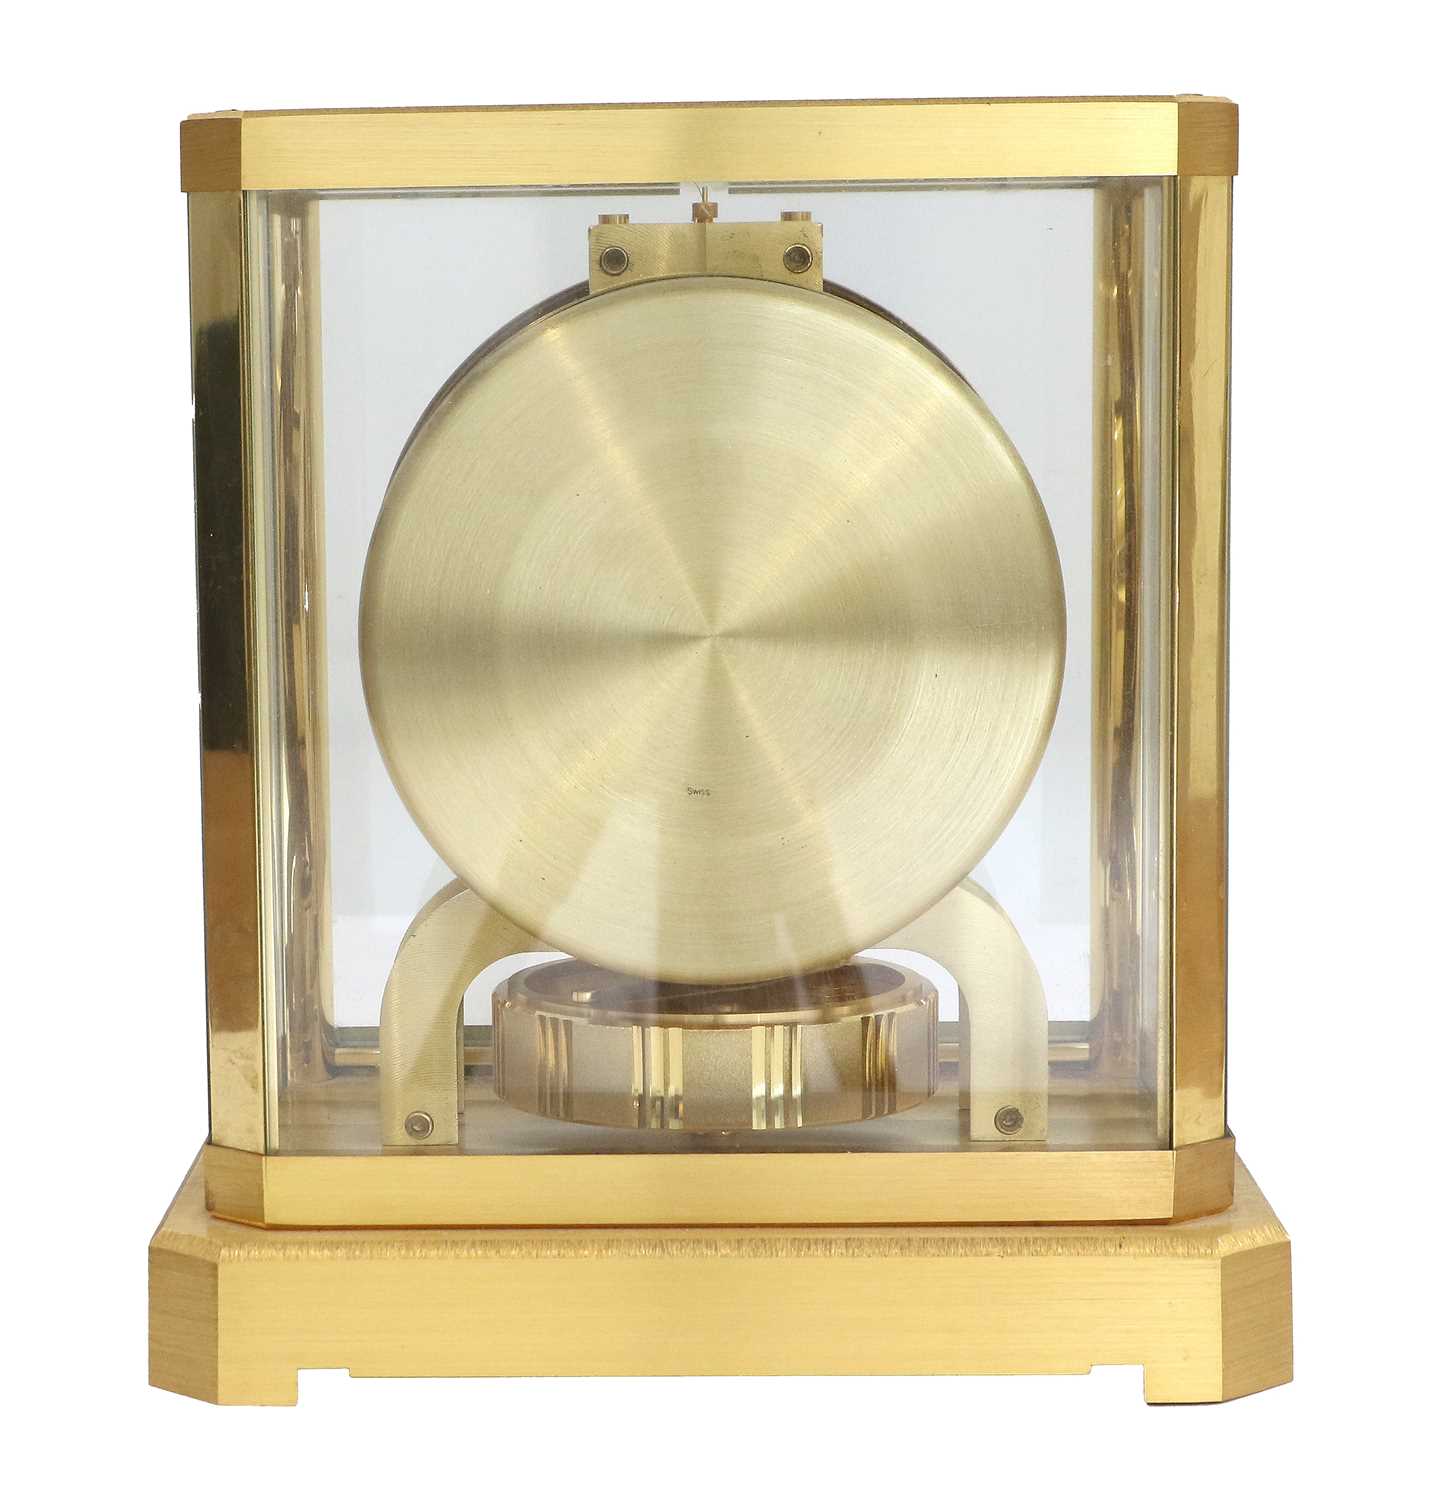 A Brass Atmos Clock, signed Jaeger LeCoultre, 20th Century, case with glass panels, front of the - Image 6 of 6